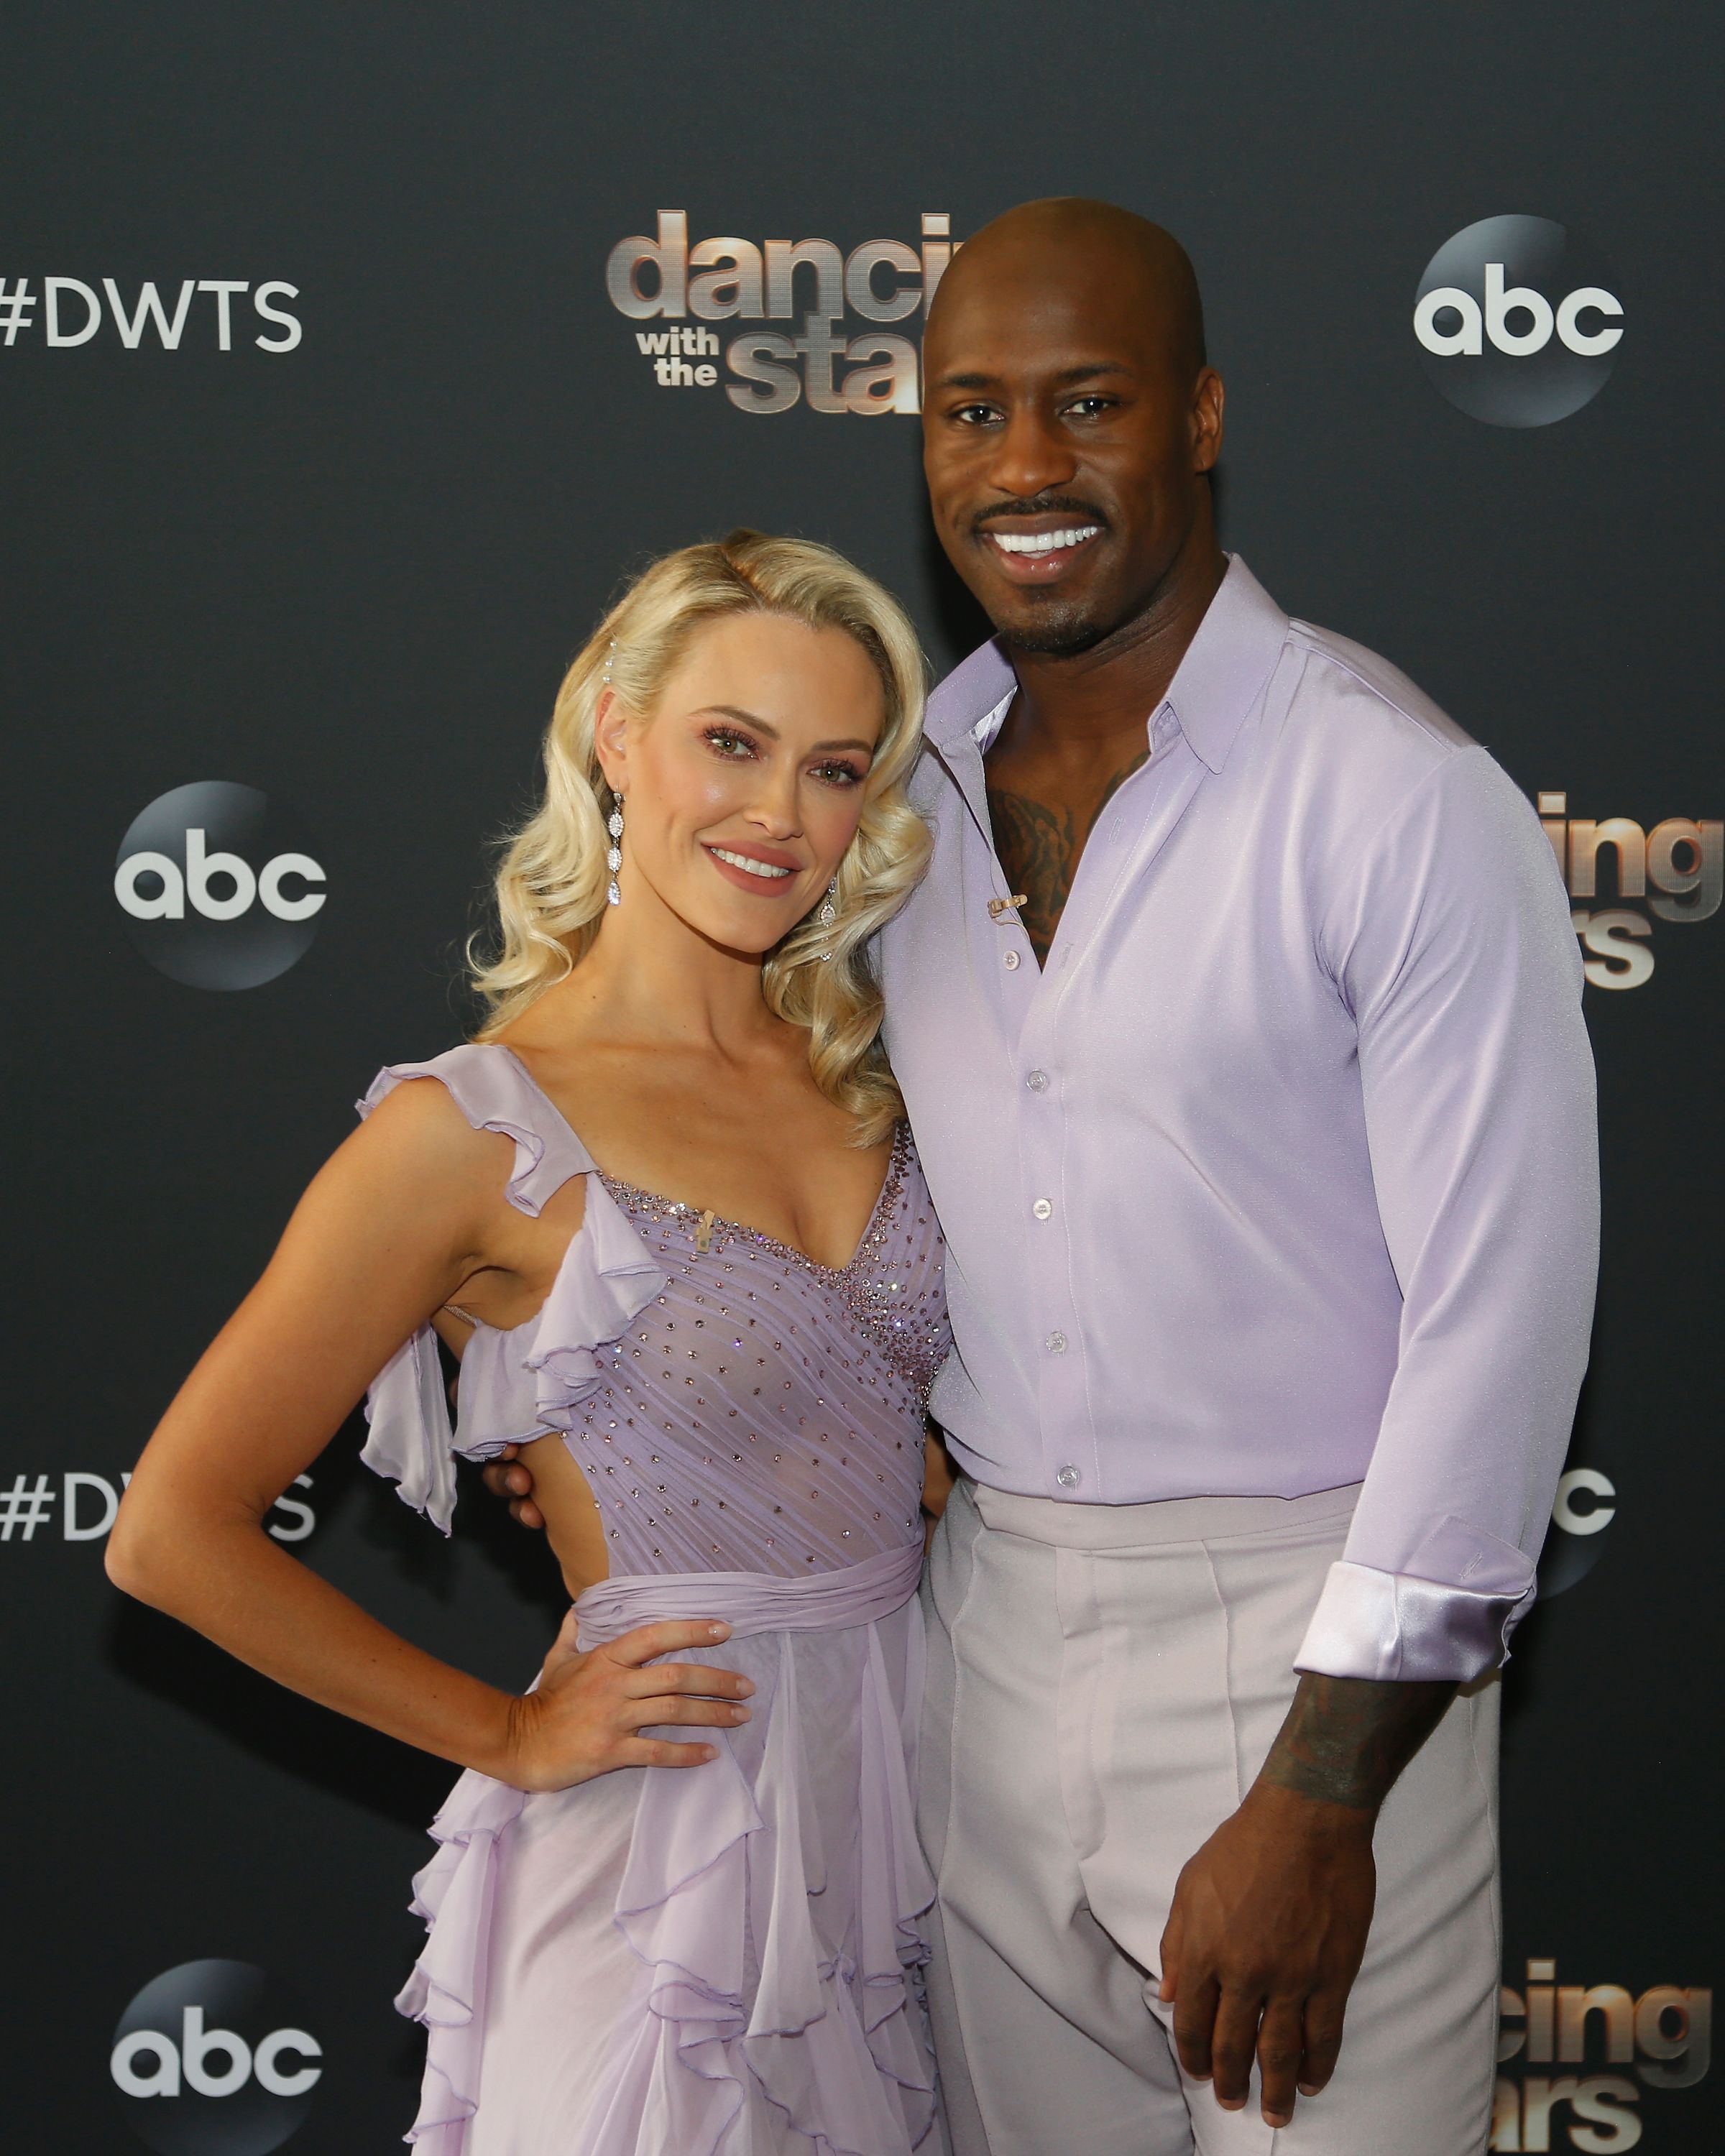 Vernon Davis and Peta Murgatroyd on the season 29 premiere of "Dancing with the Stars" on September 14, 2020 | Photo: Getty Images